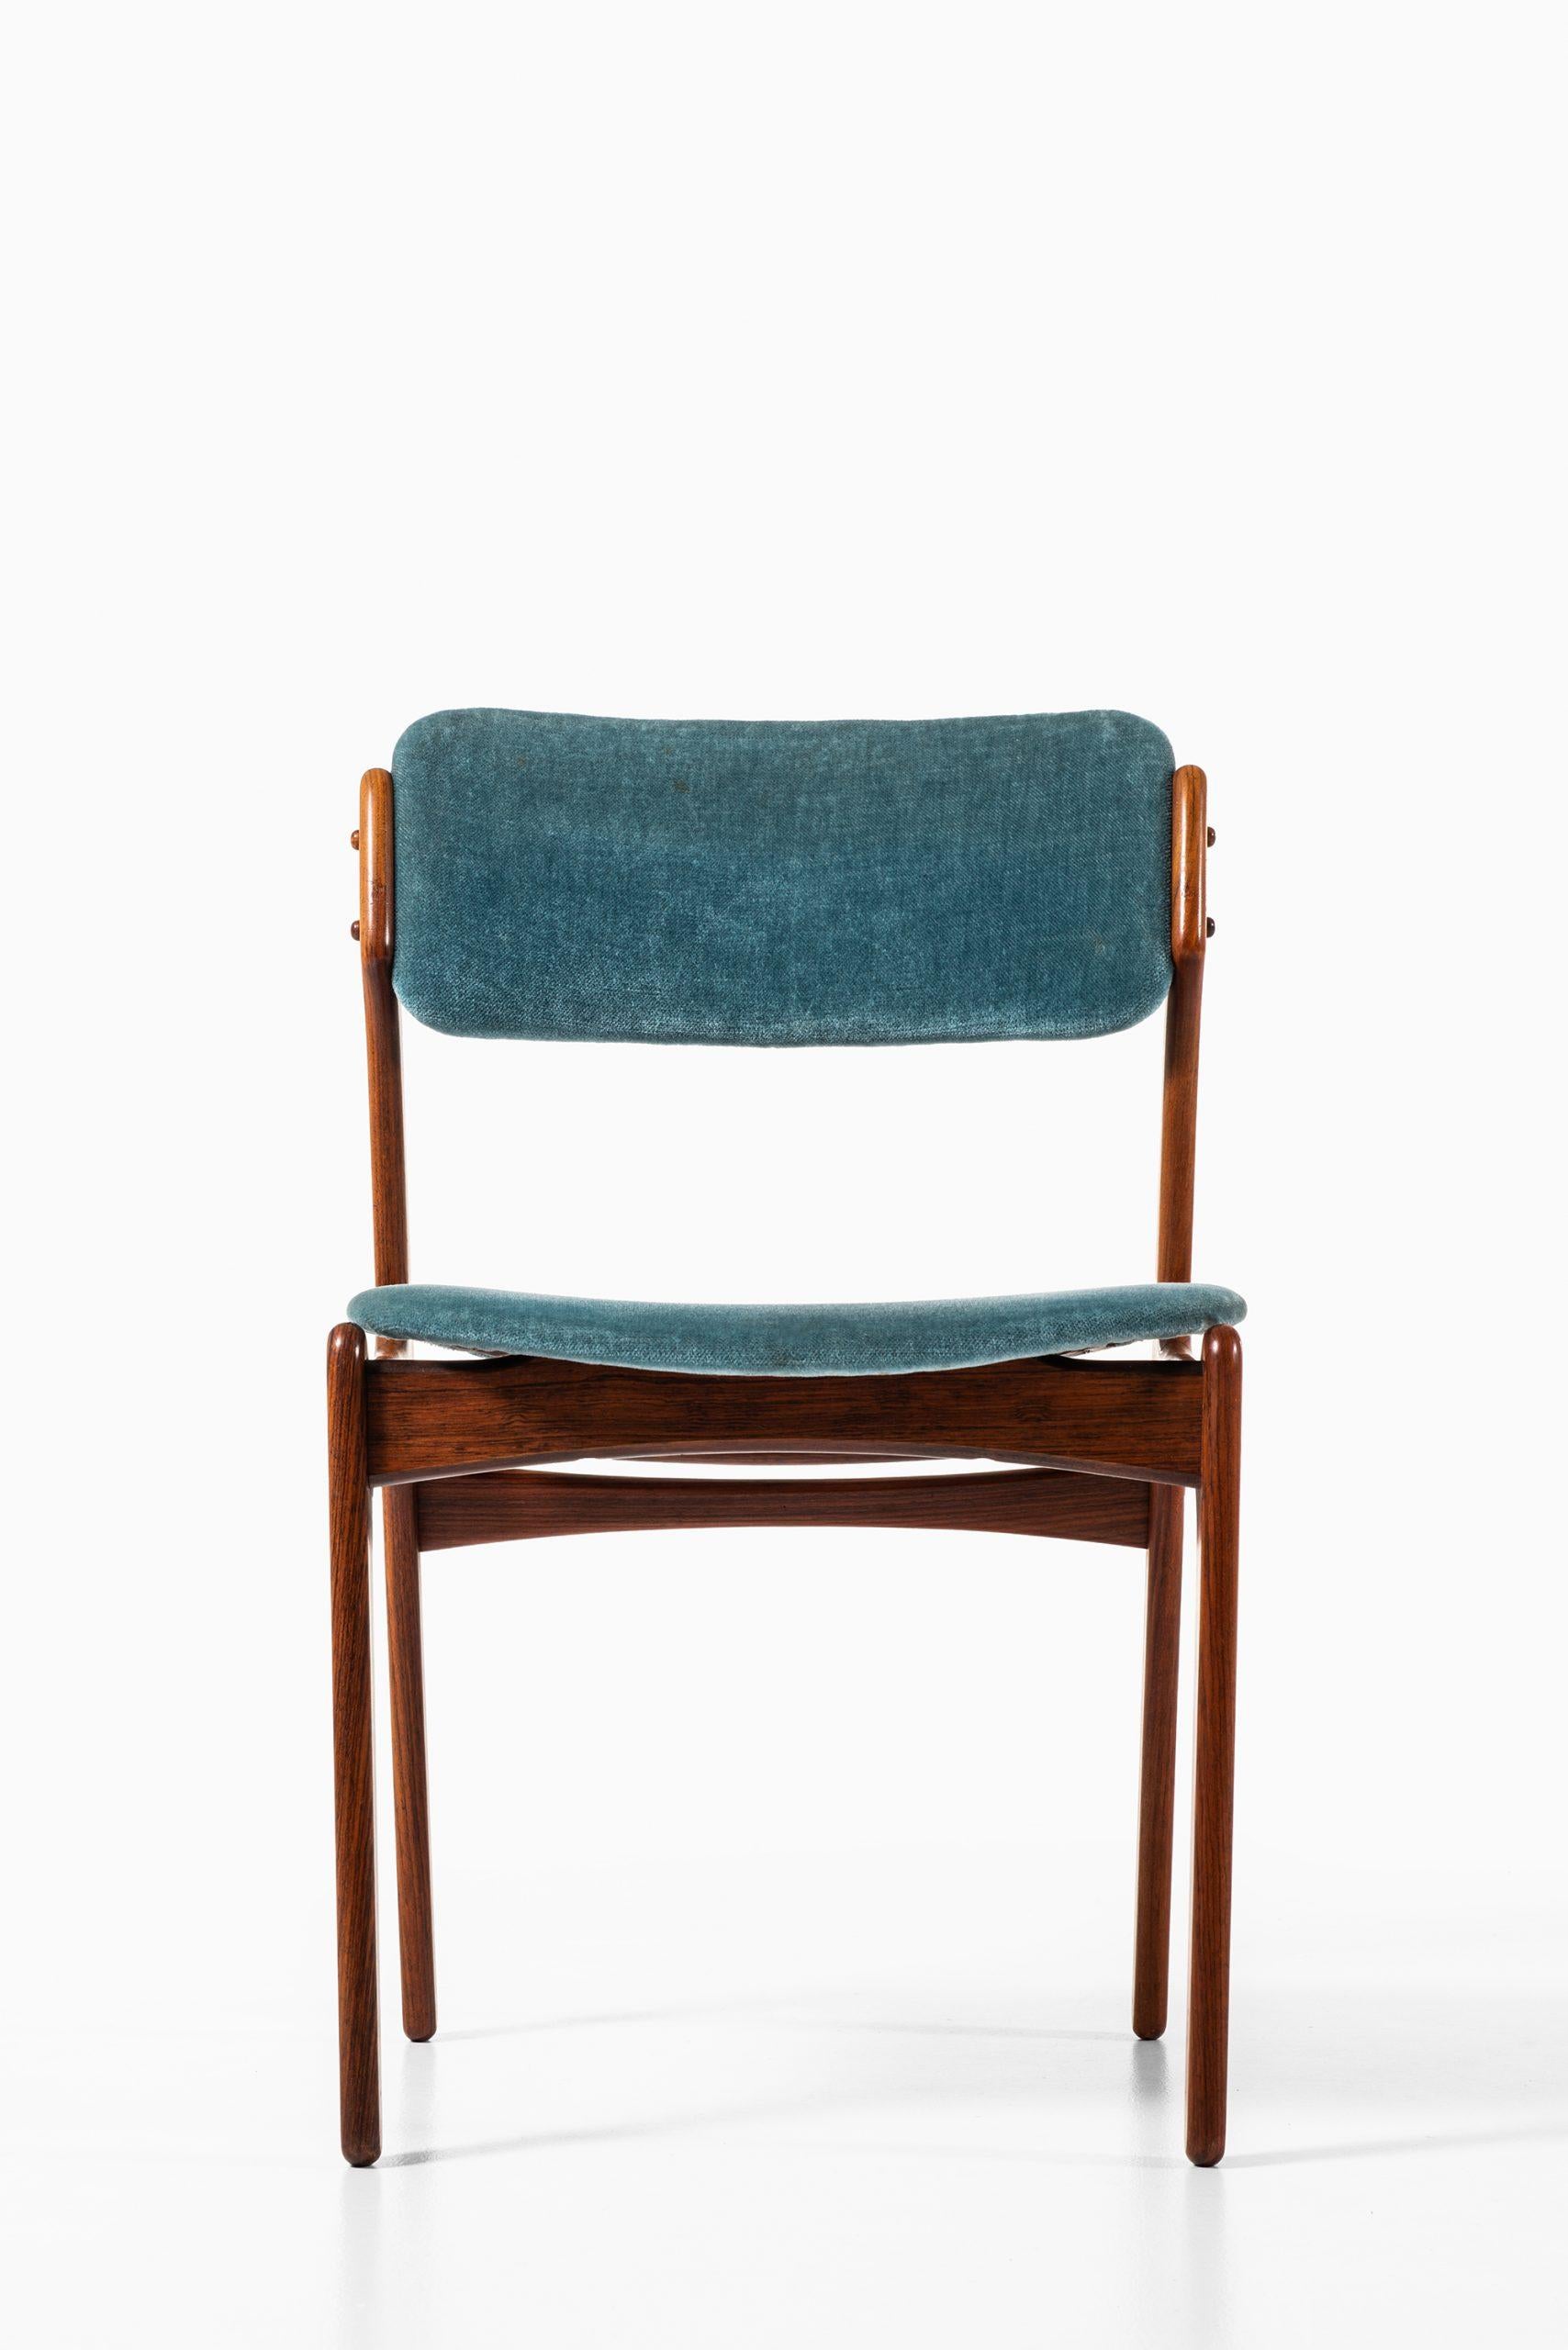 Fabric Erik Buck Dining Chairs Model OD-49 by Oddense Maskinsnedkeri A/S in Denmark For Sale